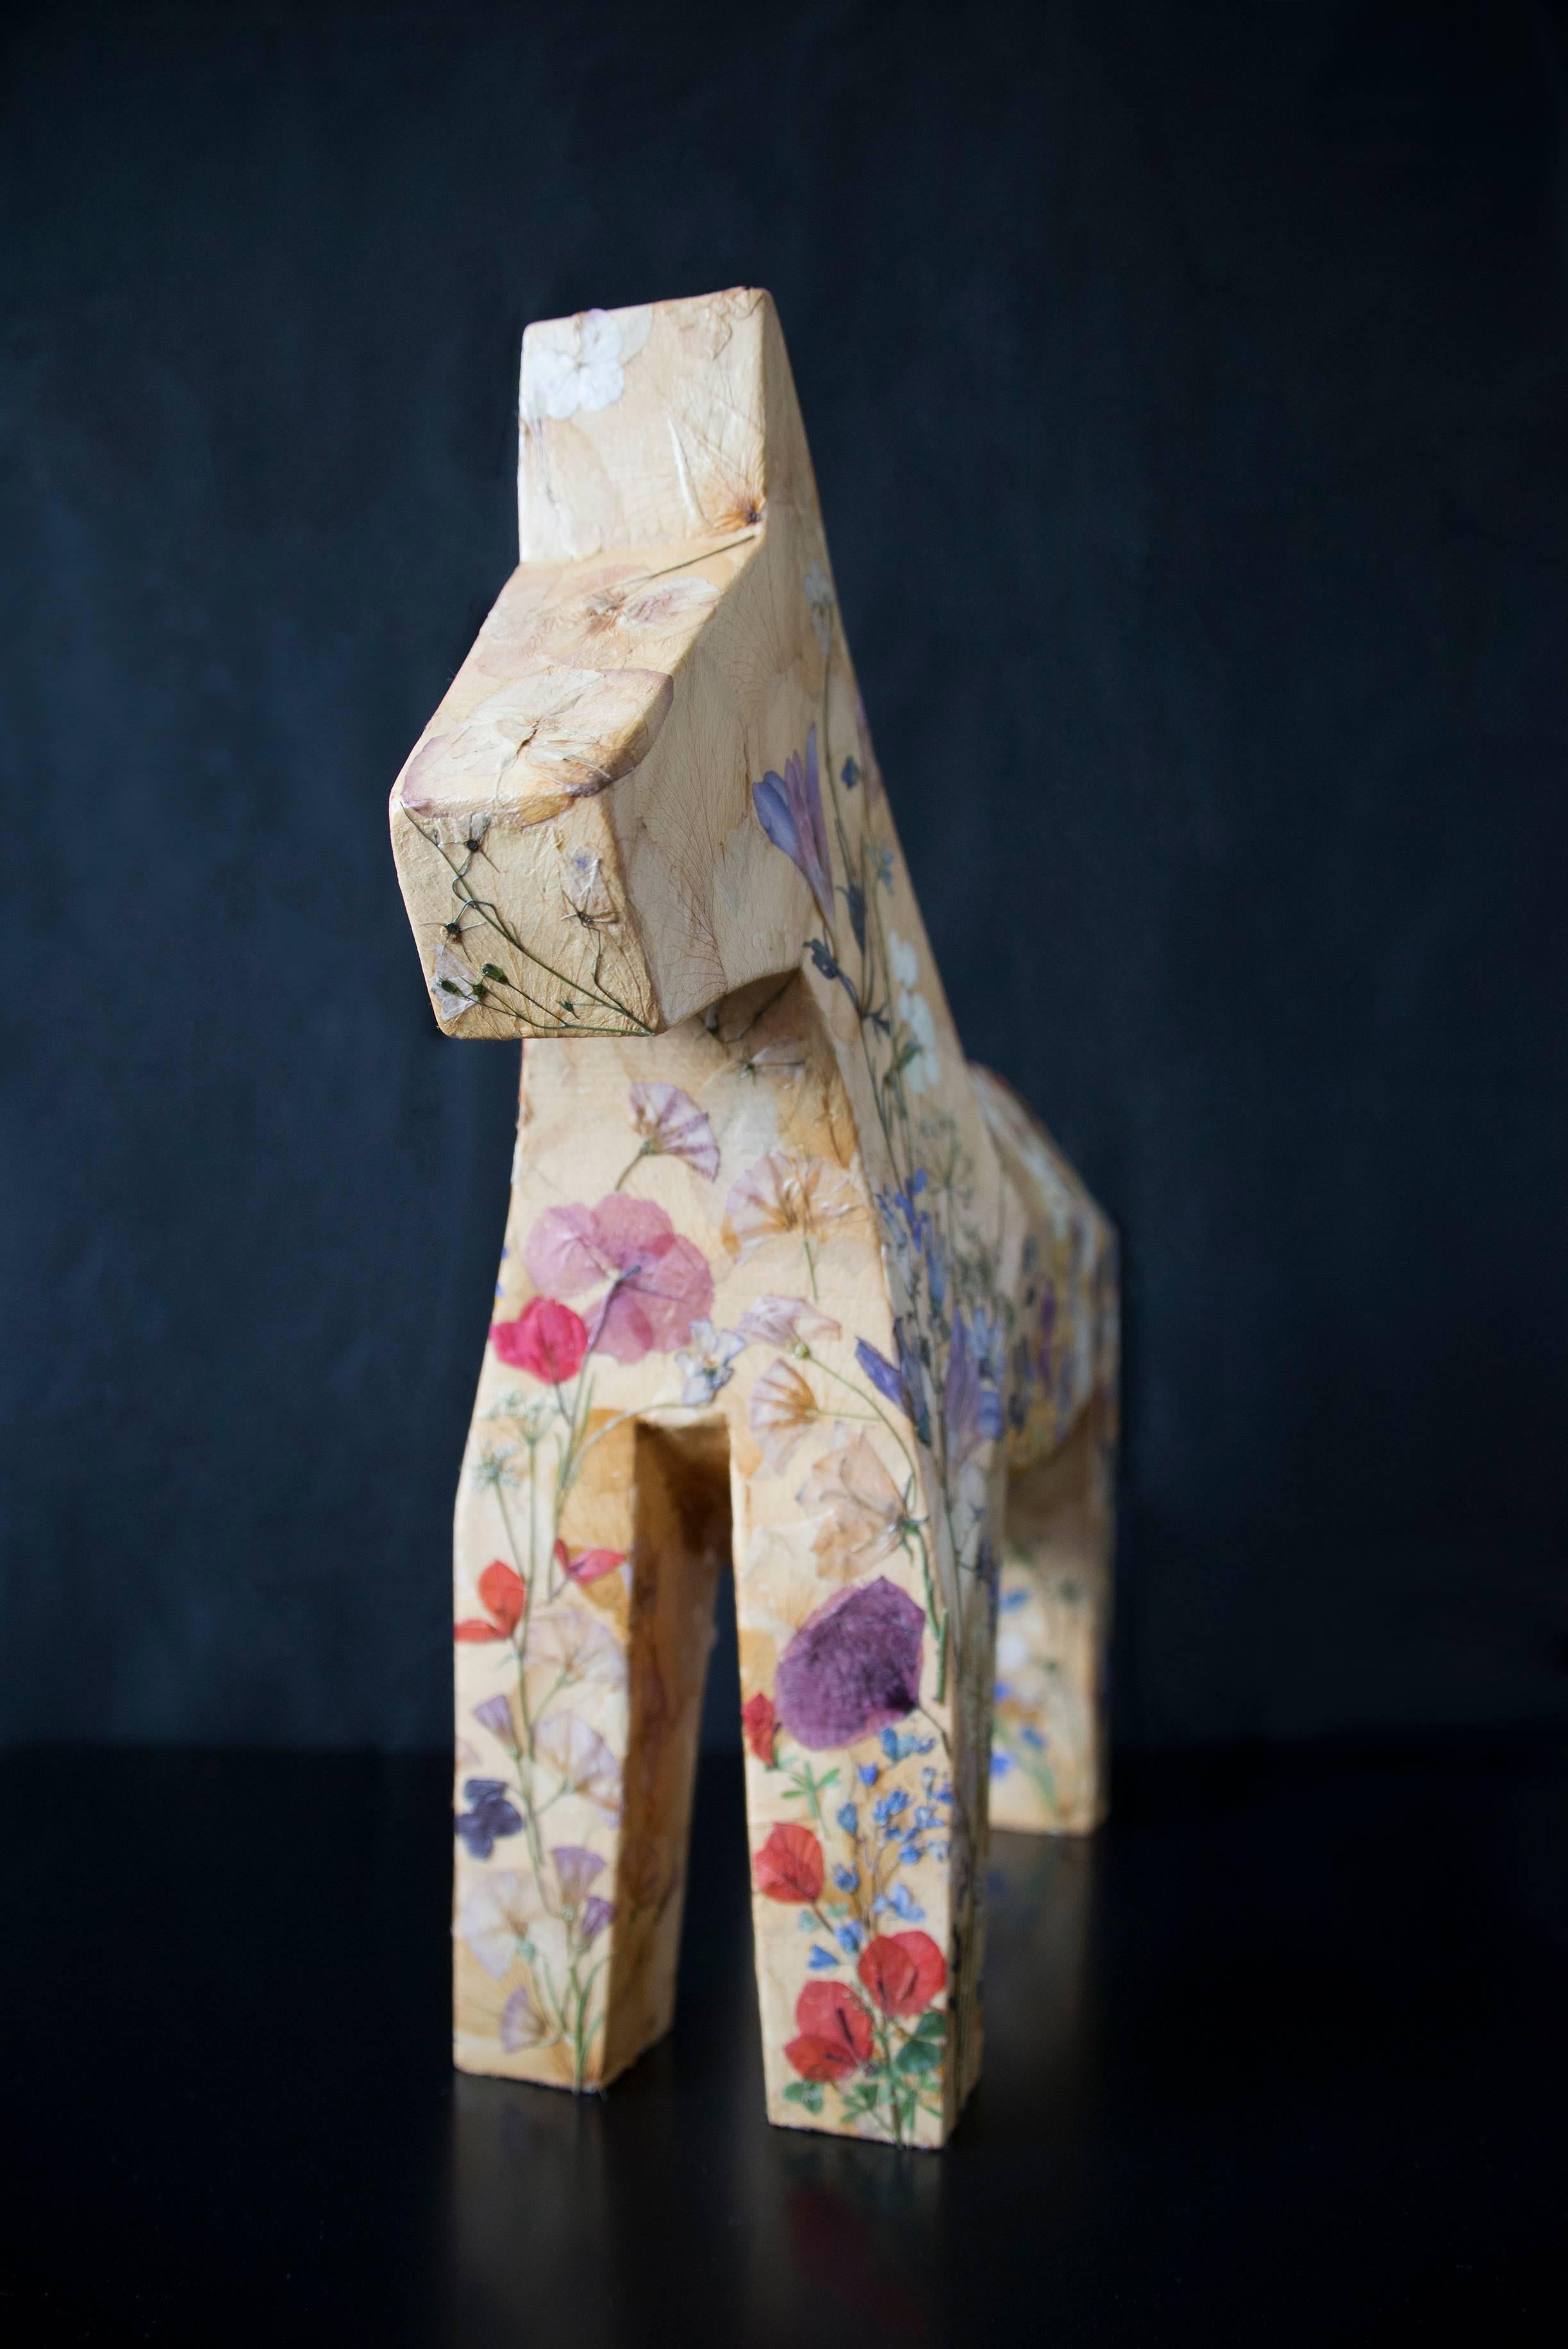 Mille Fiori,  pressed flowers on wood horse  - Sculpture by K-OD